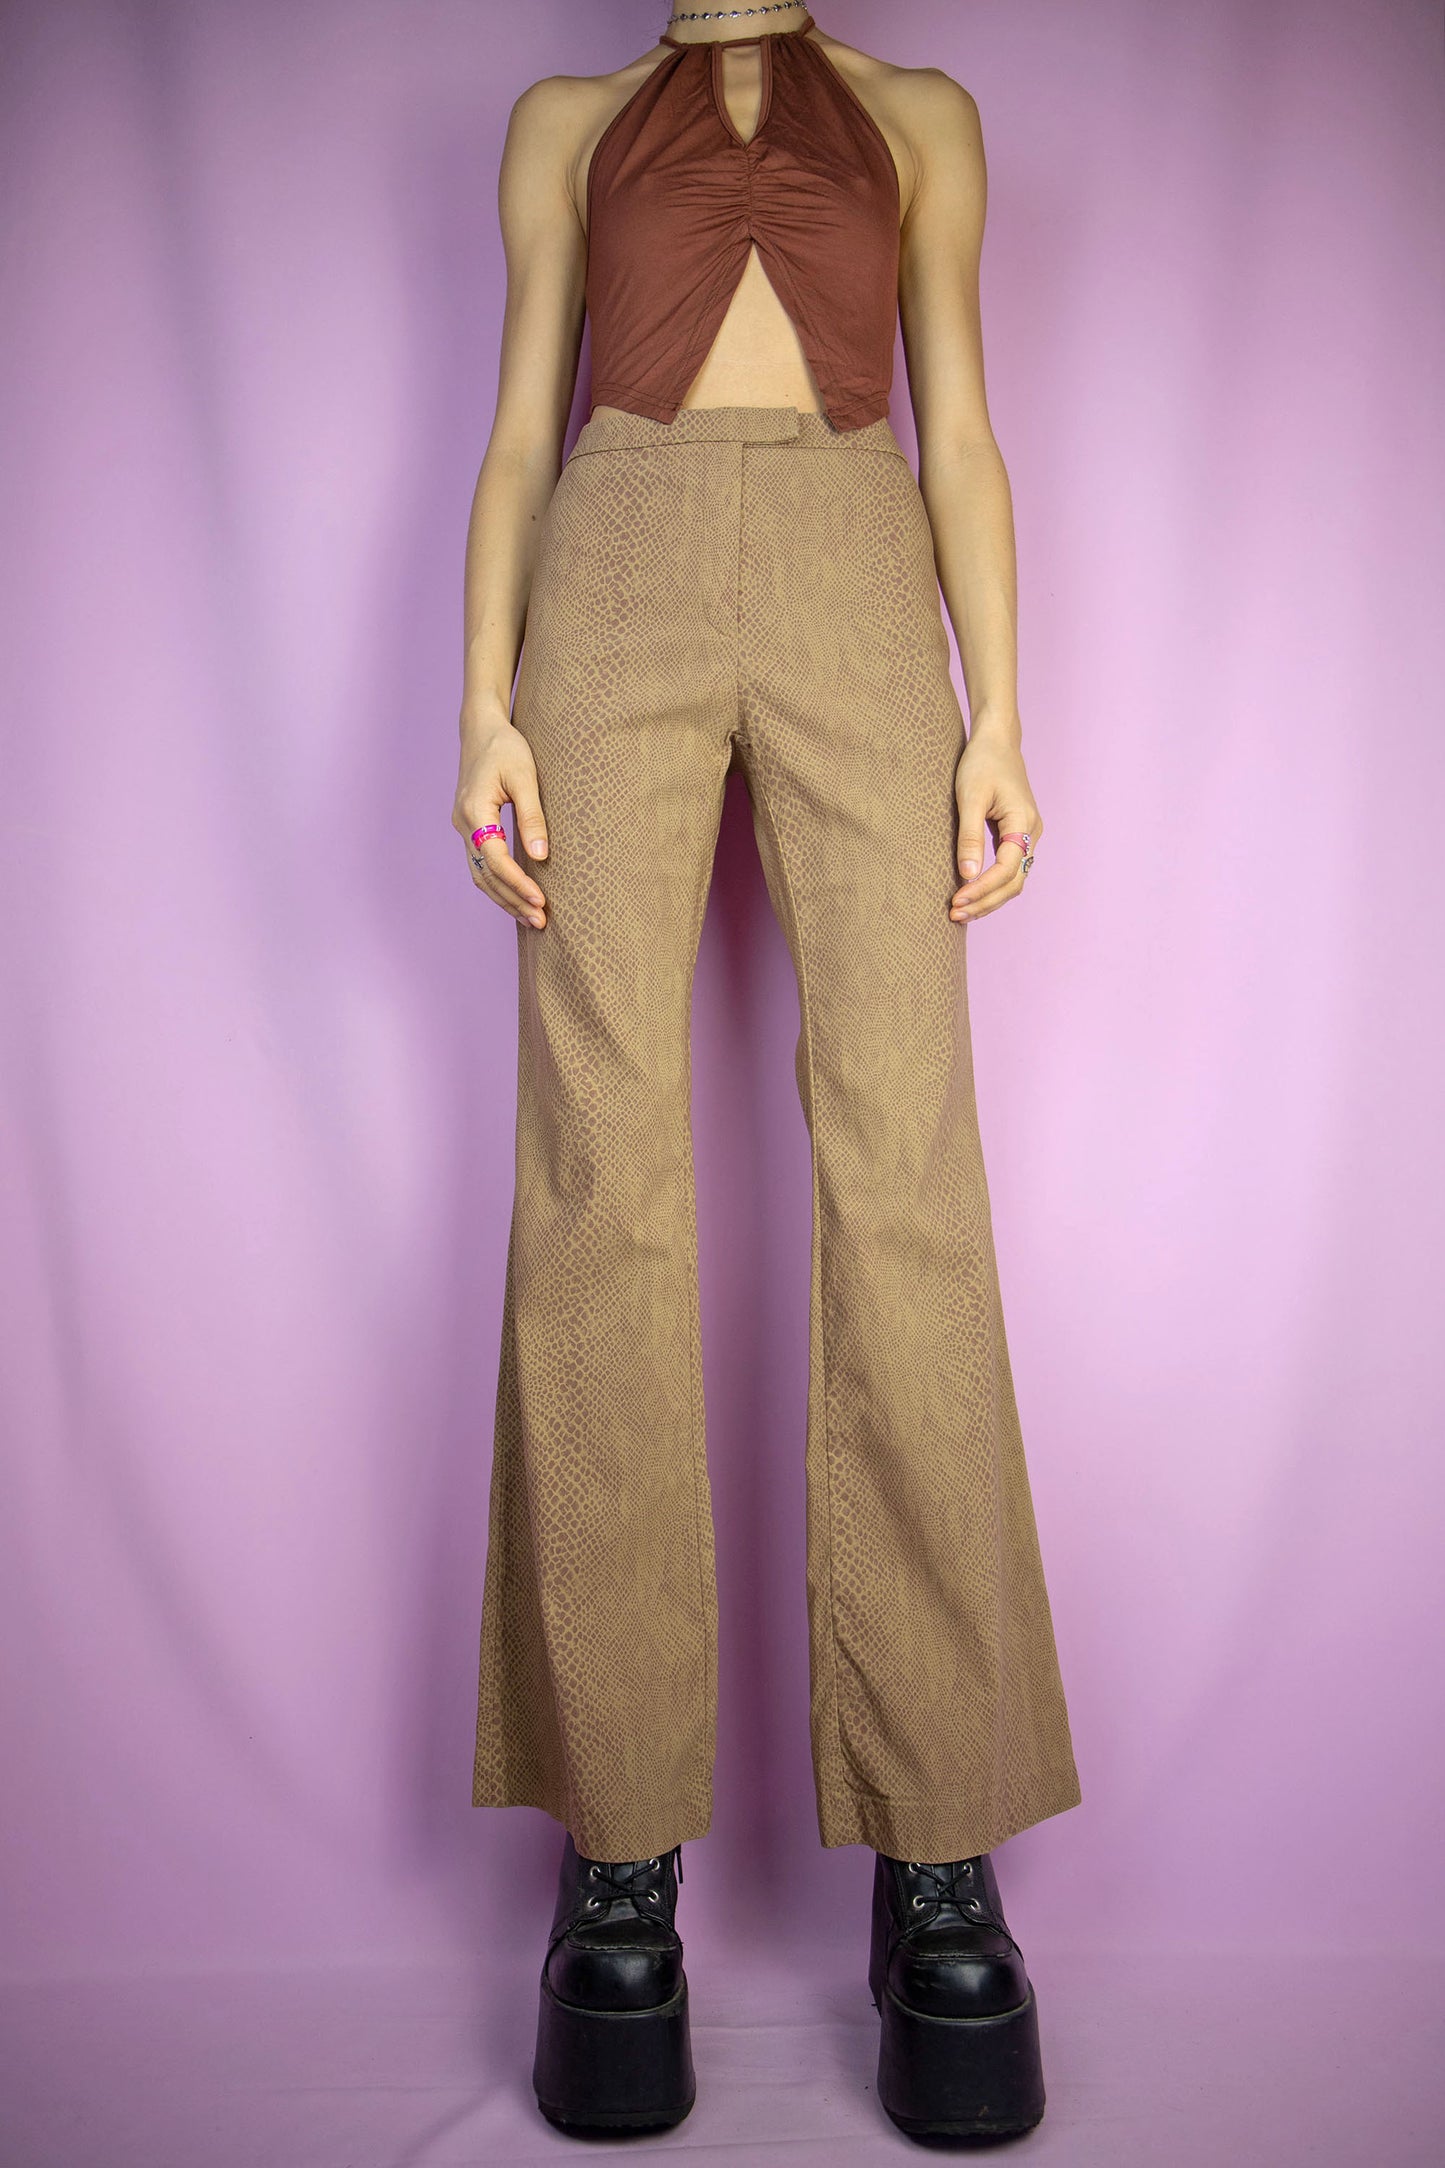 The Y2K Brown Flare Pants are vintage stretchy faux croc animal print pants with front zipper closure. Cyber party festival rave 2000s trousers.